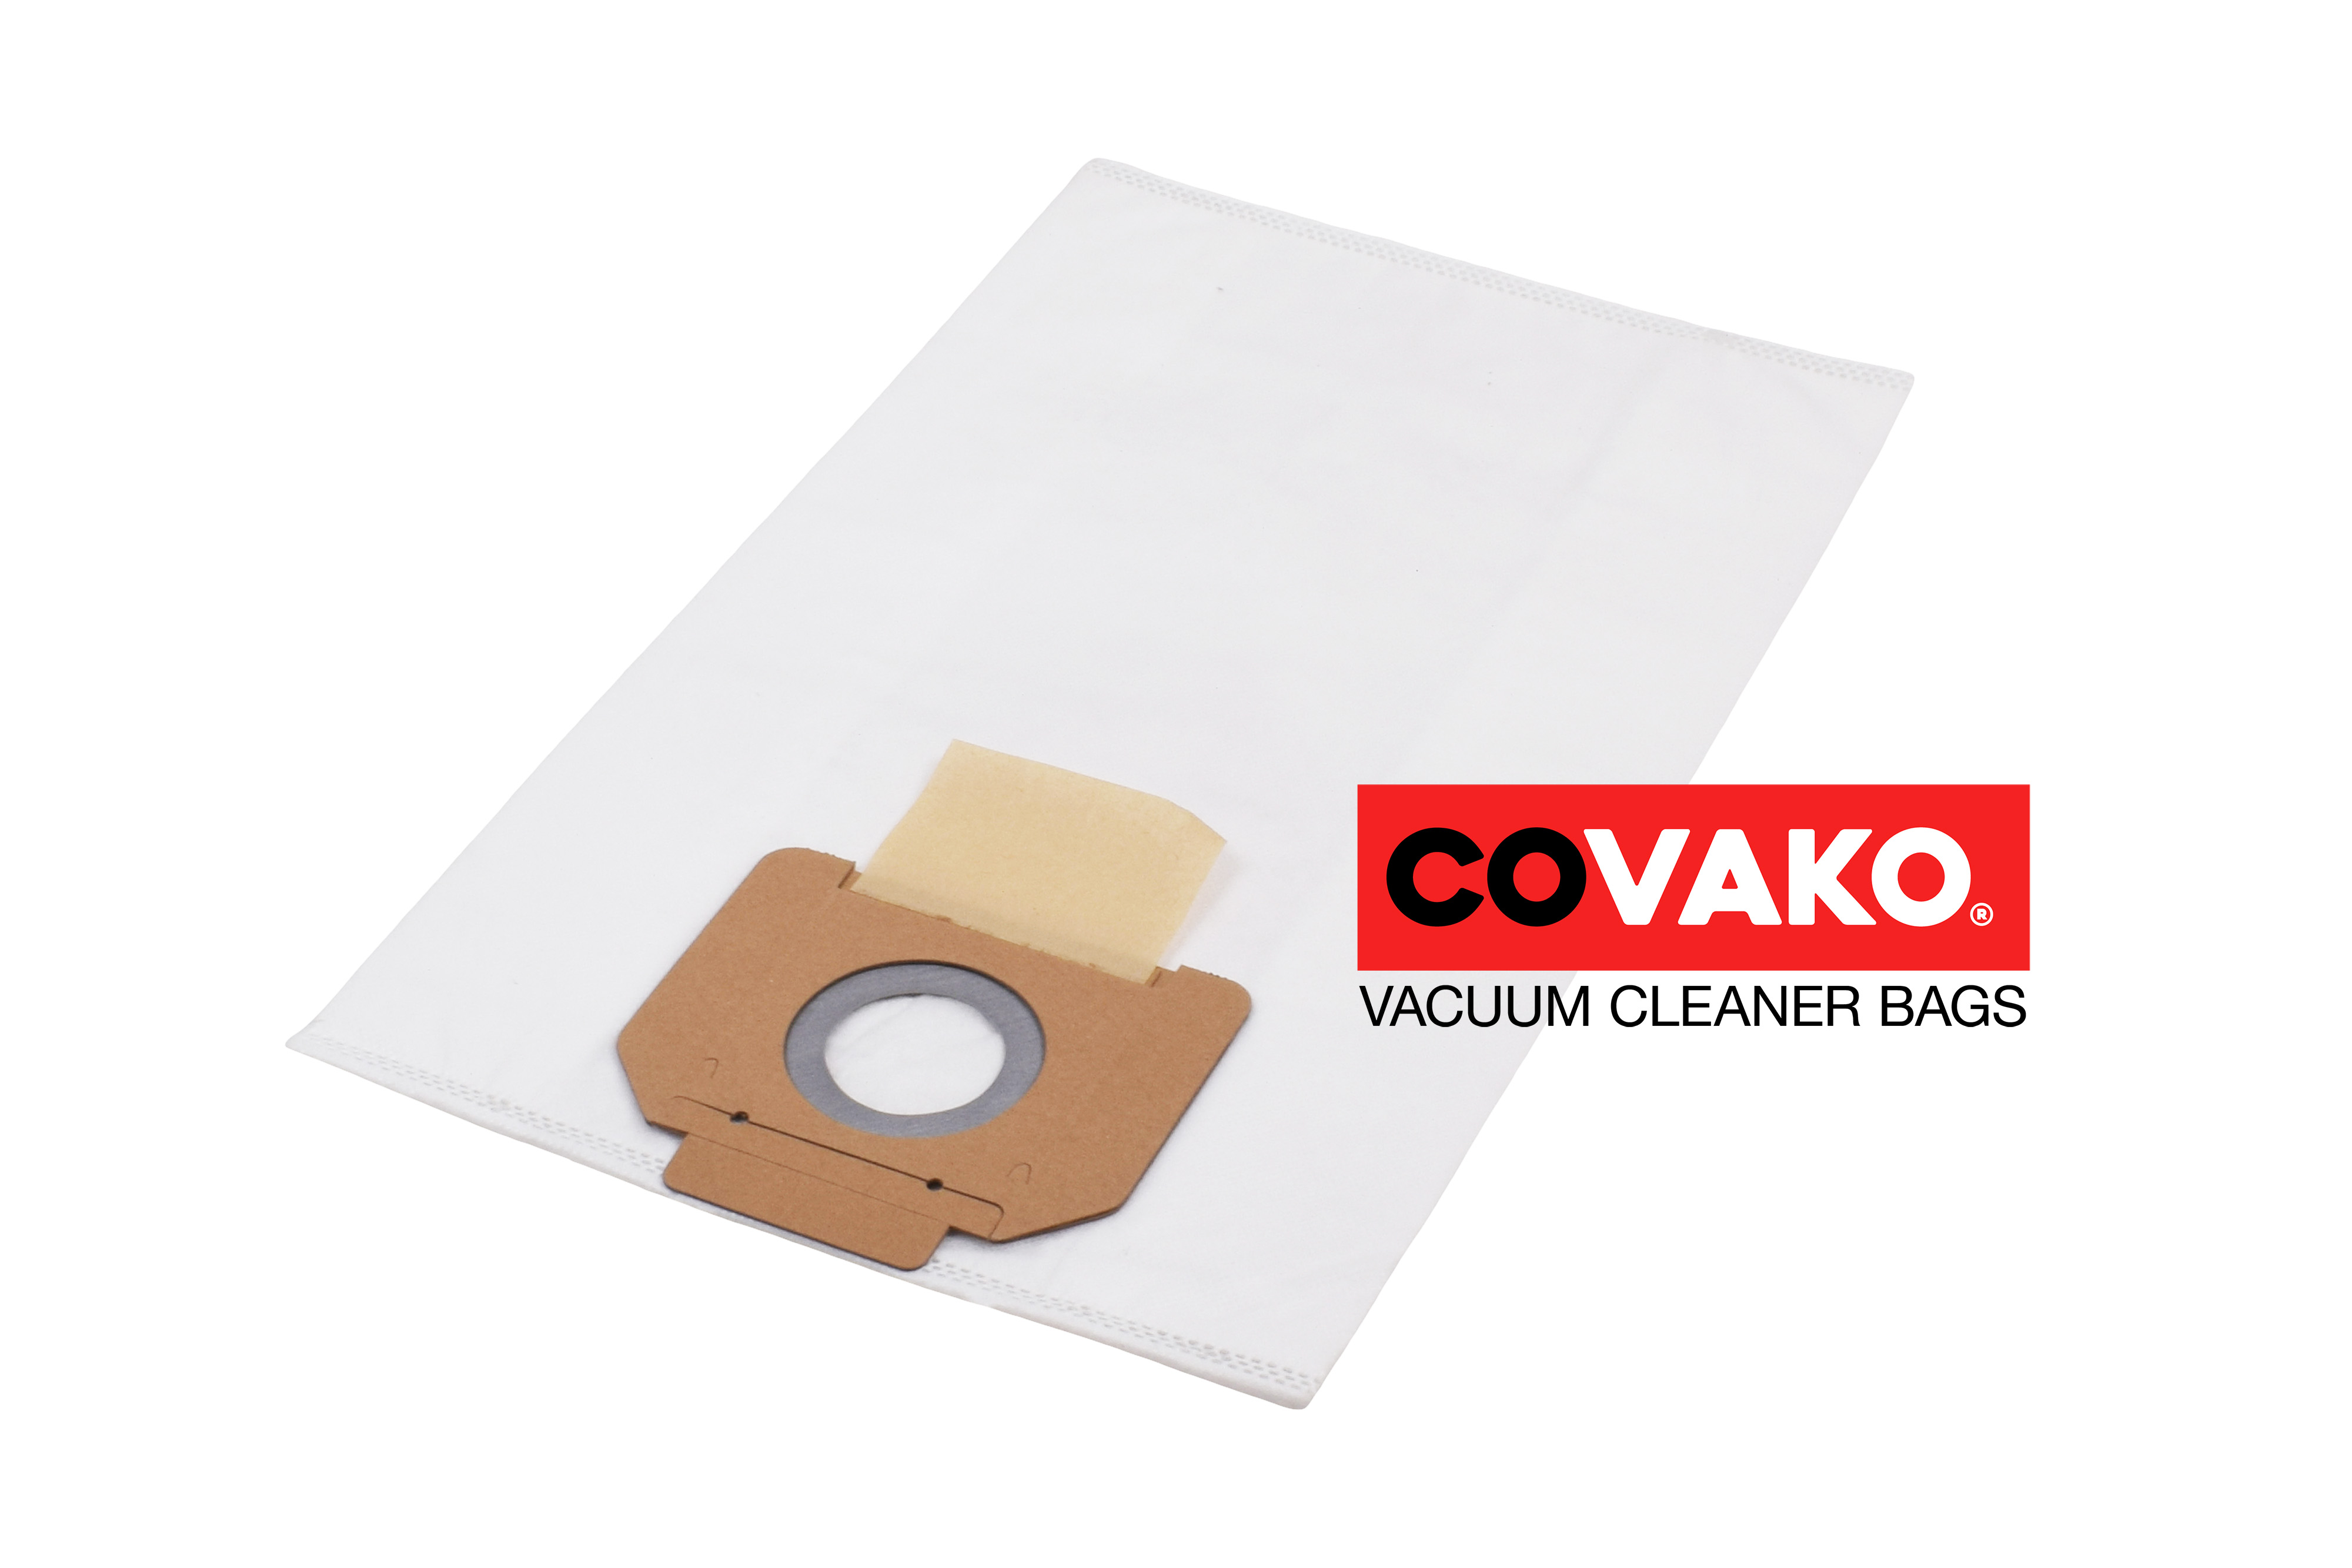 Gansow GS 1/18 W&D / Synthesis - Gansow vacuum cleaner bags